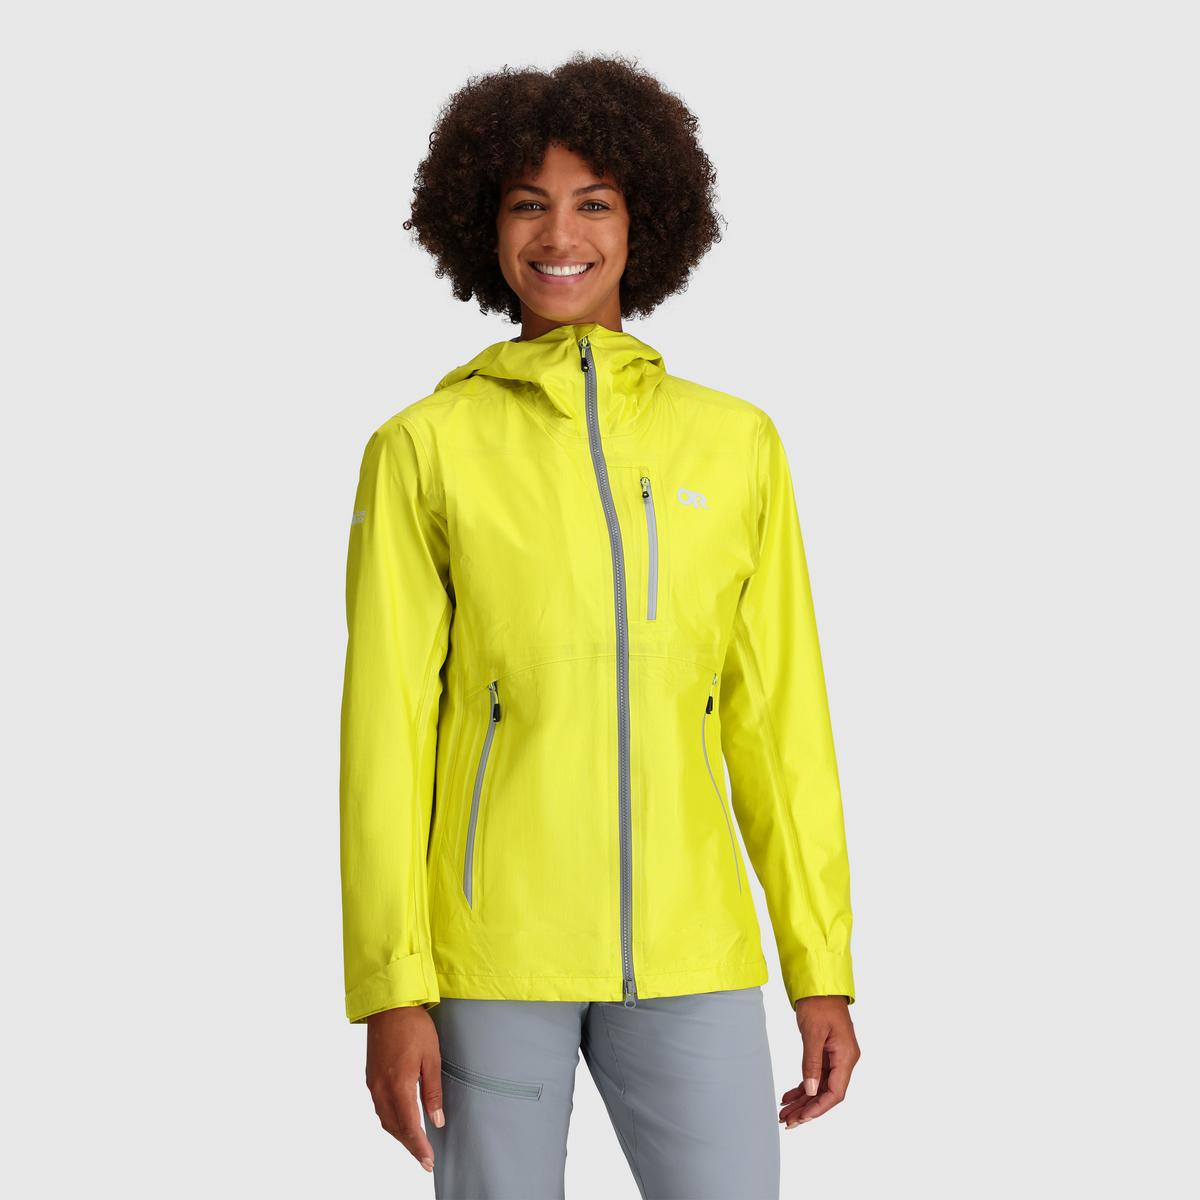 Unlock Wilderness' choice in the Outdoor Research Vs North Face comparison, the Helium AscentShell Jacket by Outdoor Research